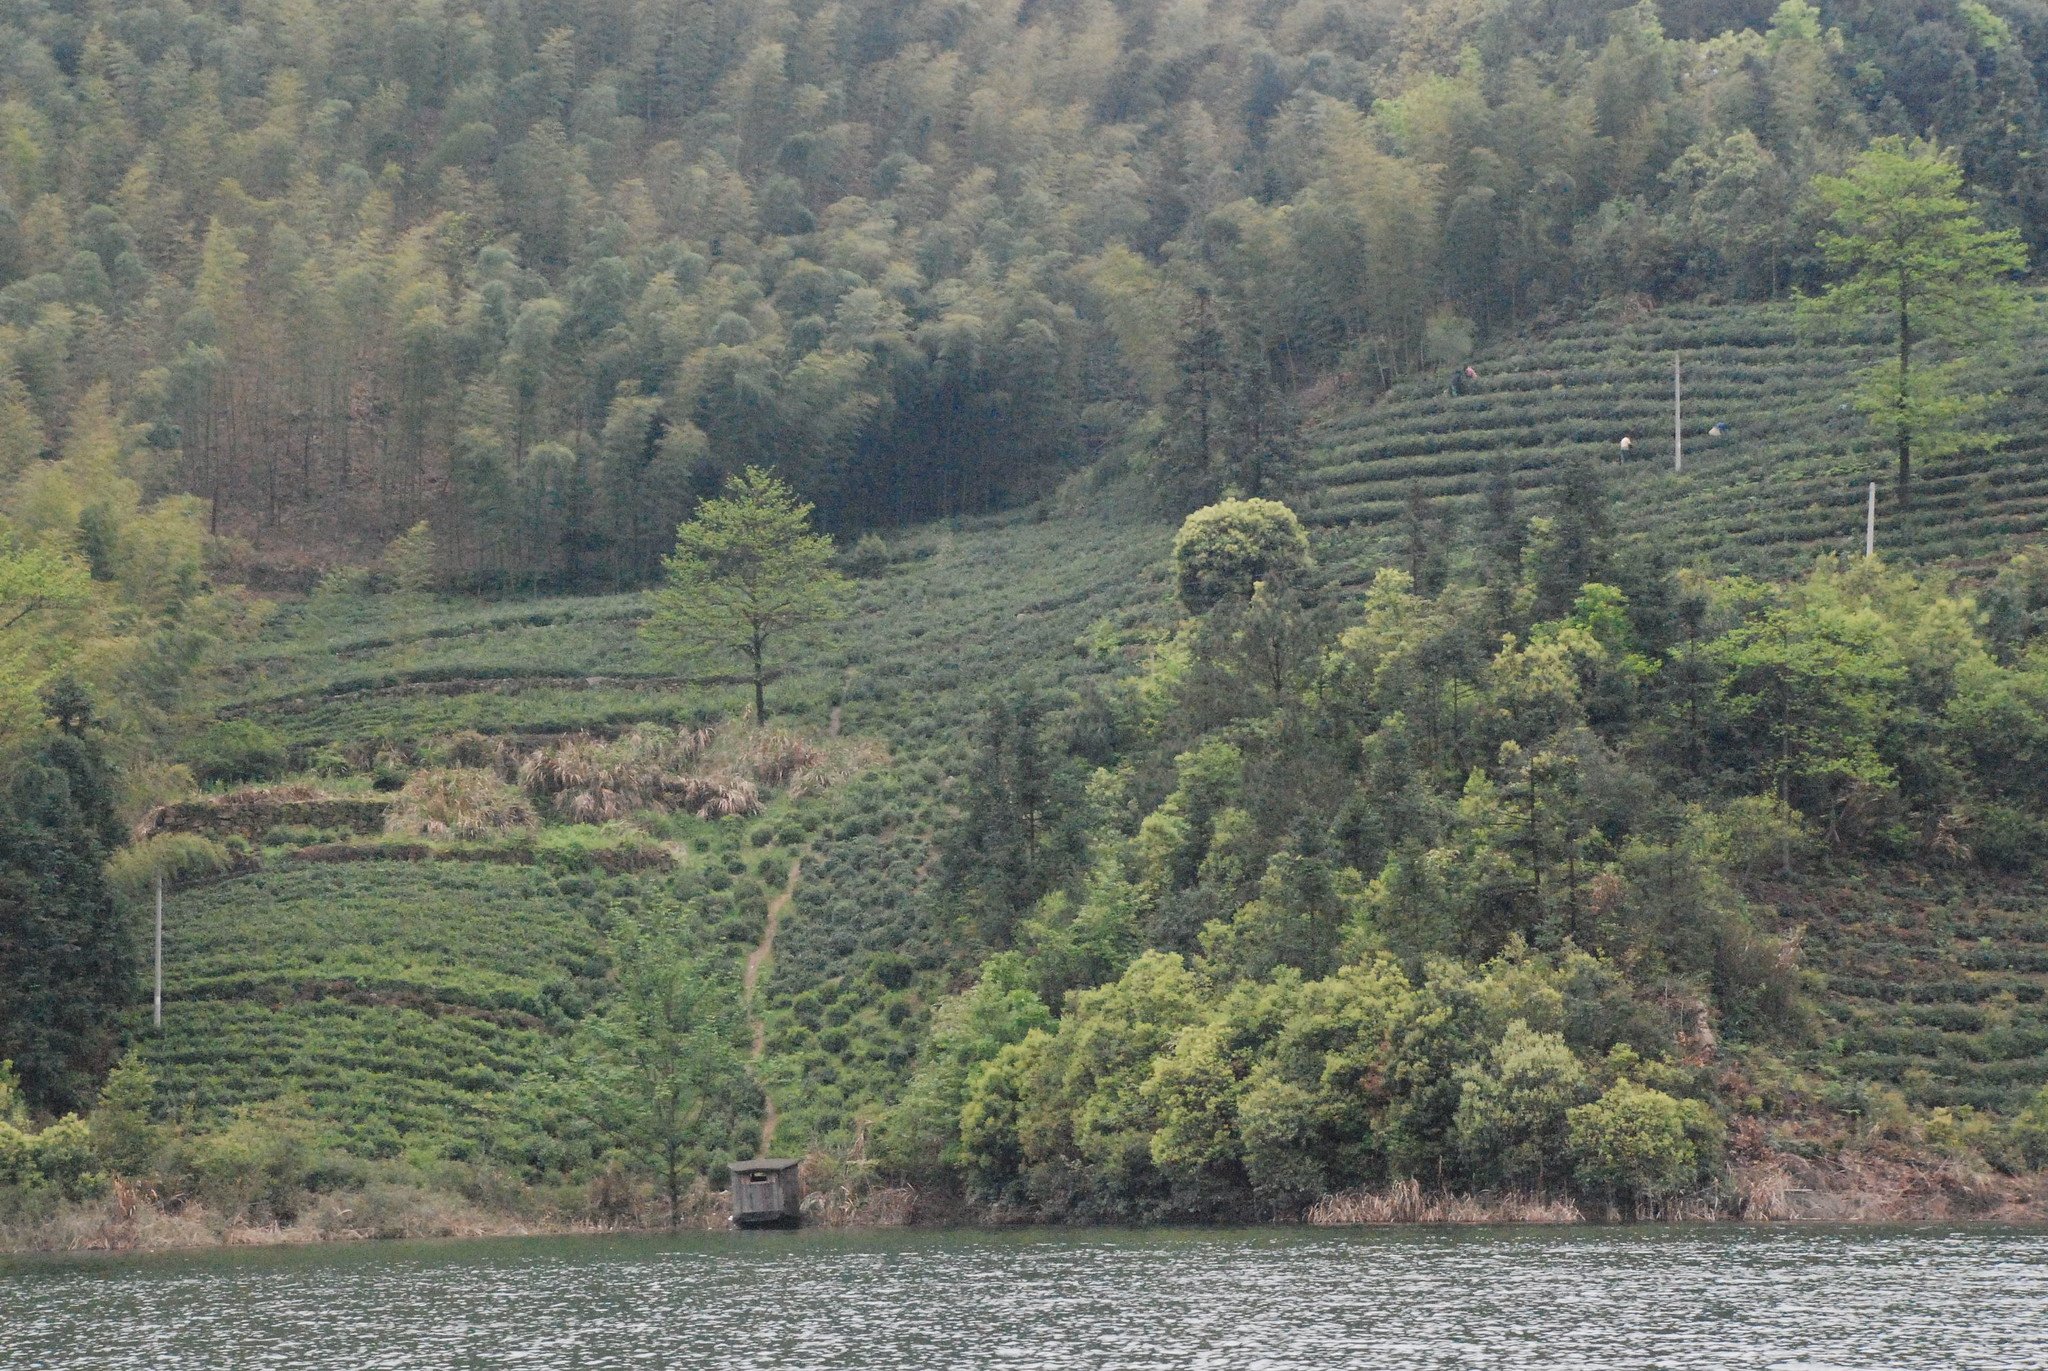 View of Tea Bushes from the Boat